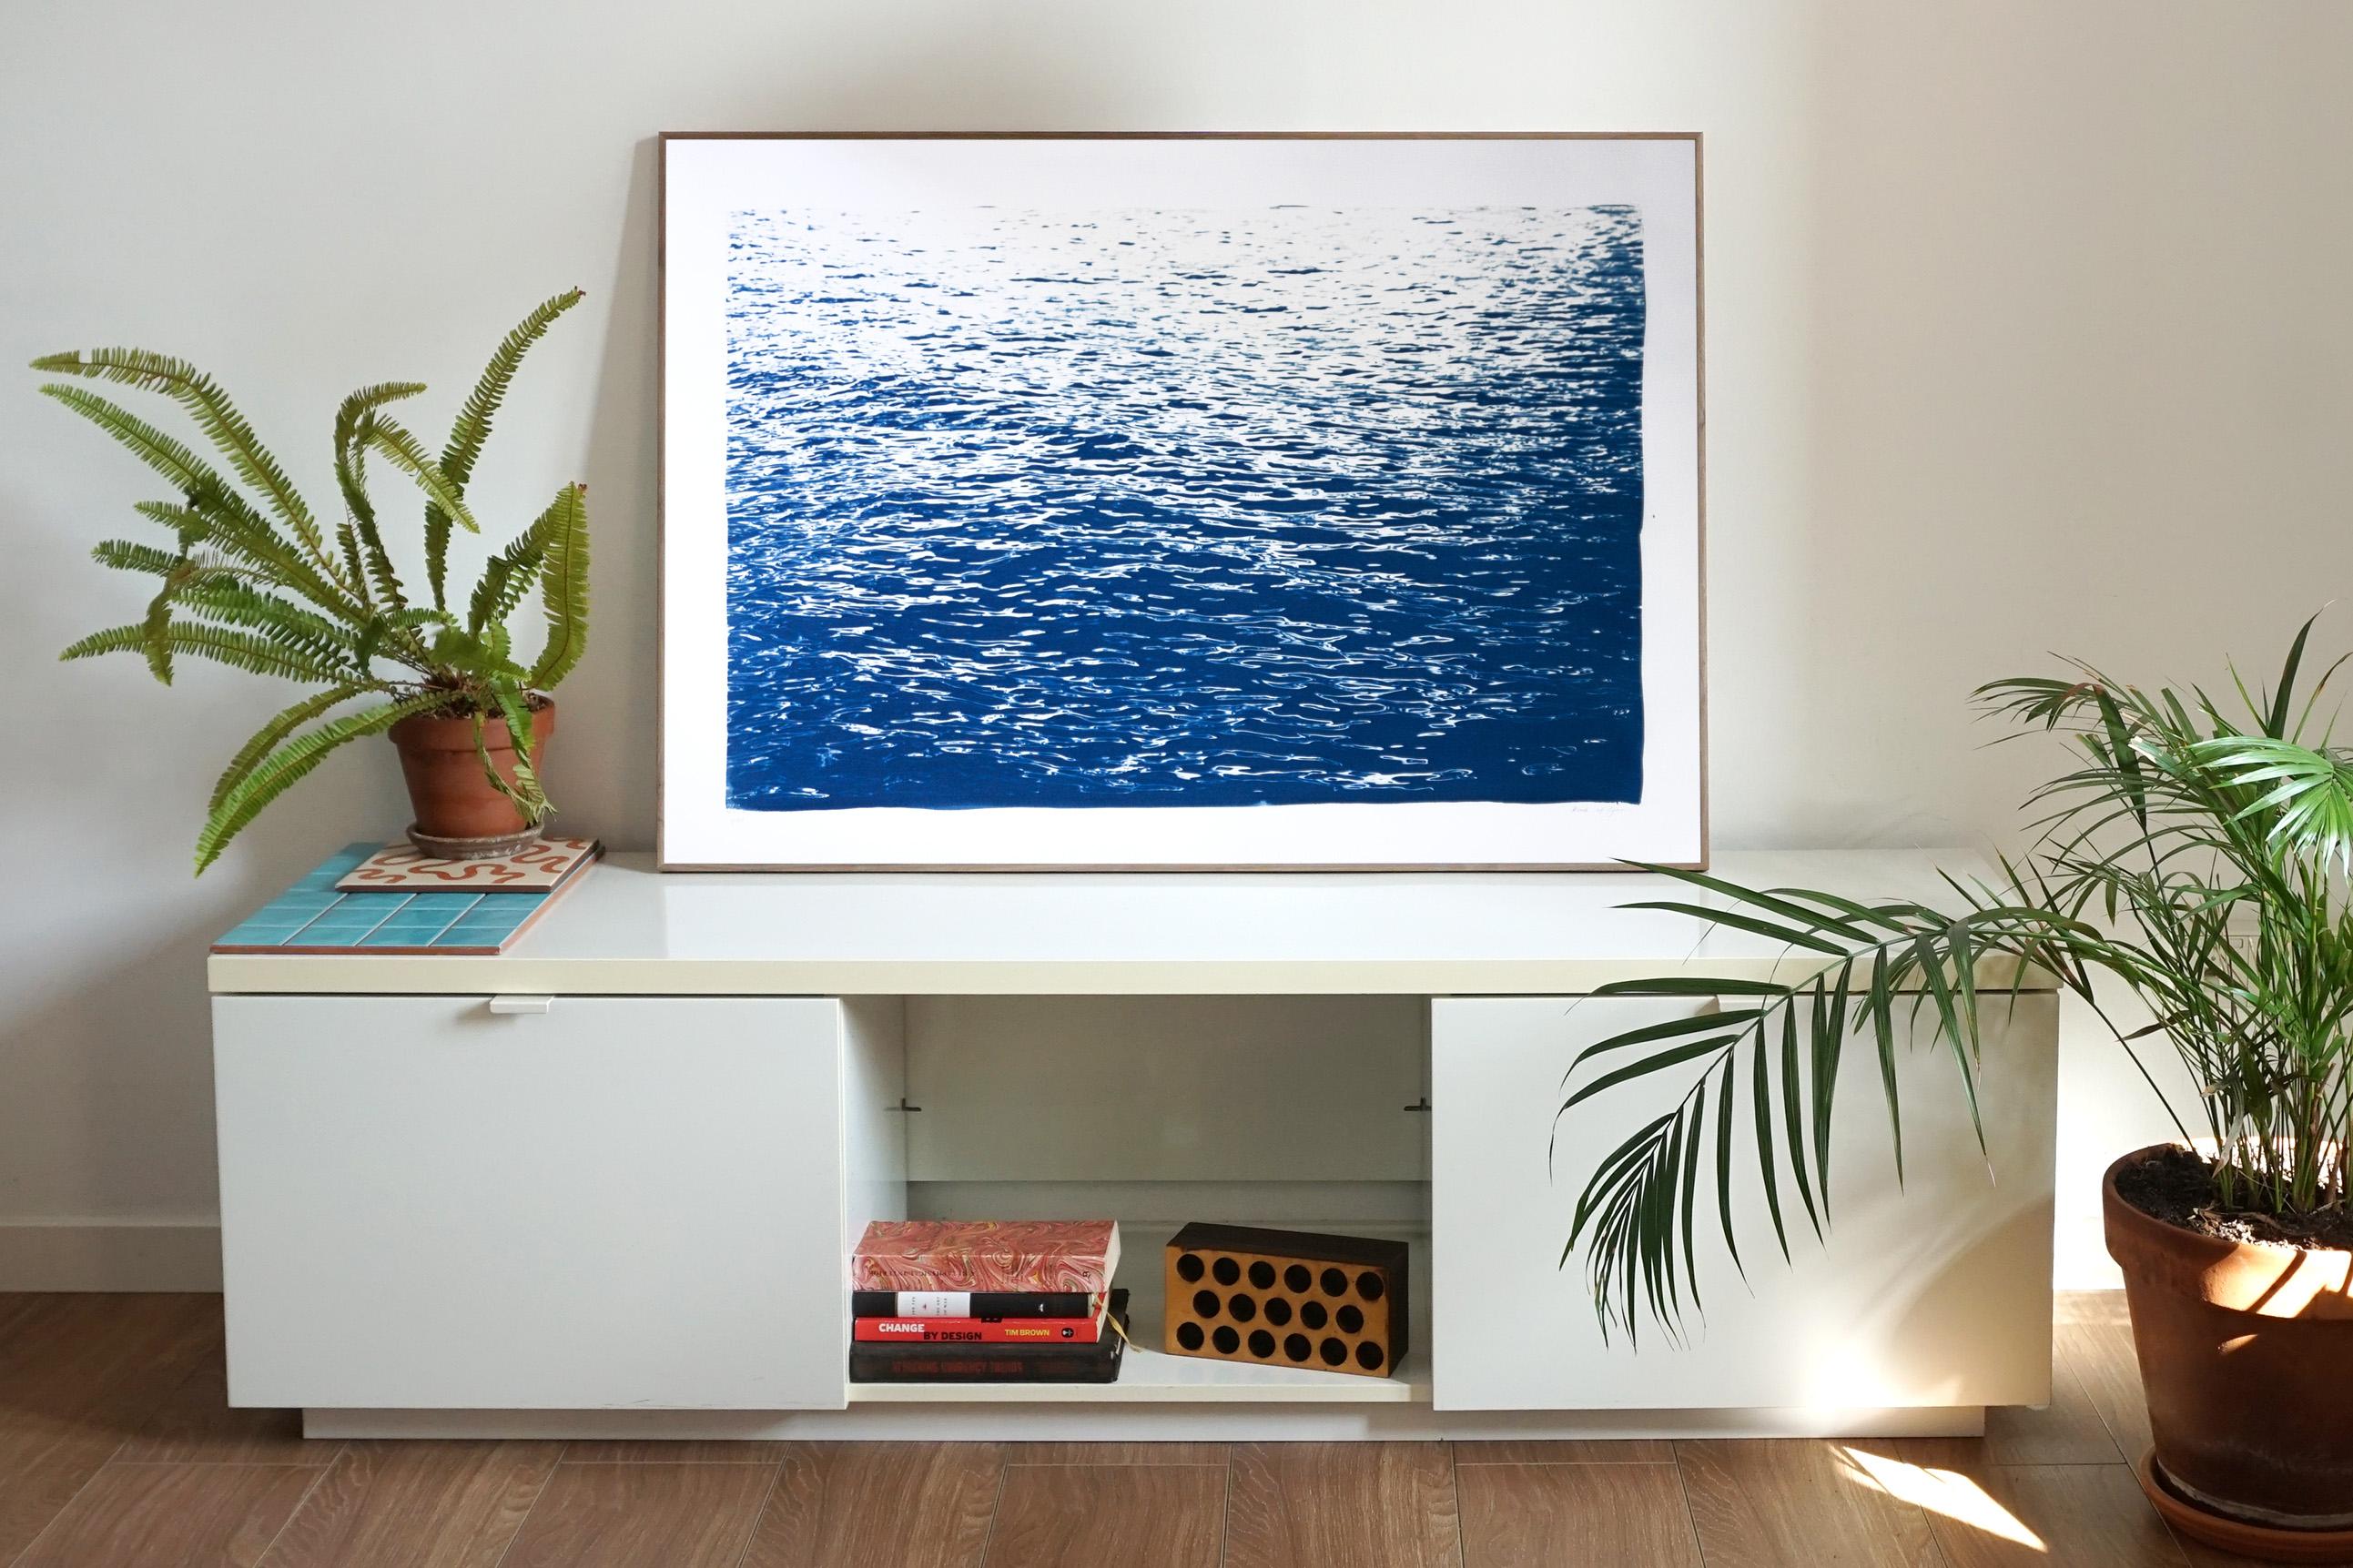 Calming Sea Ripples in Blue, Hand Printed Nautical Blueprint, Mediterranean Life - Abstract Geometric Art by Kind of Cyan